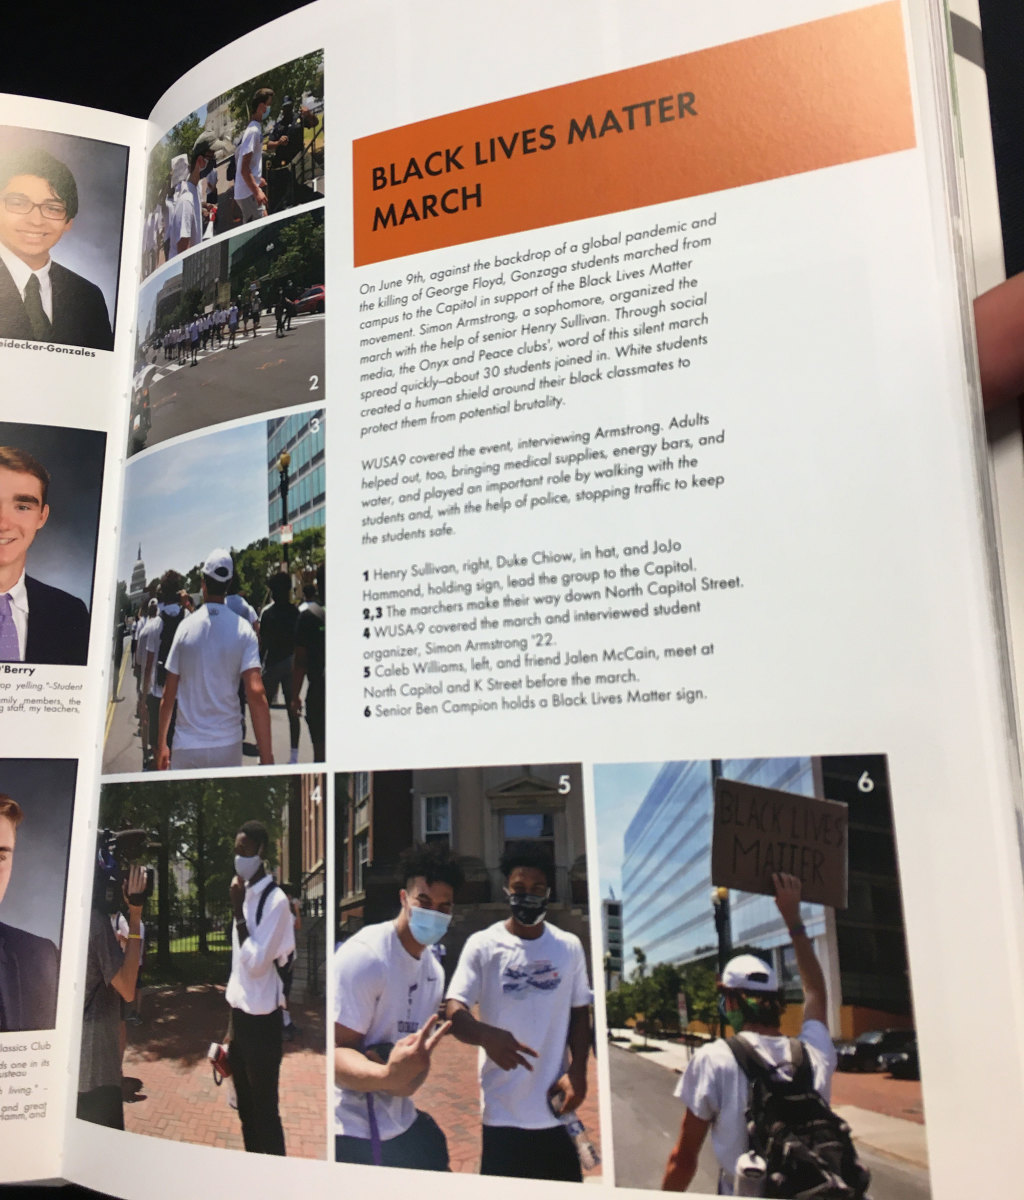 Caleb Williams appears in the Gonzaga yearbook for participating in a Black Lives Matter march